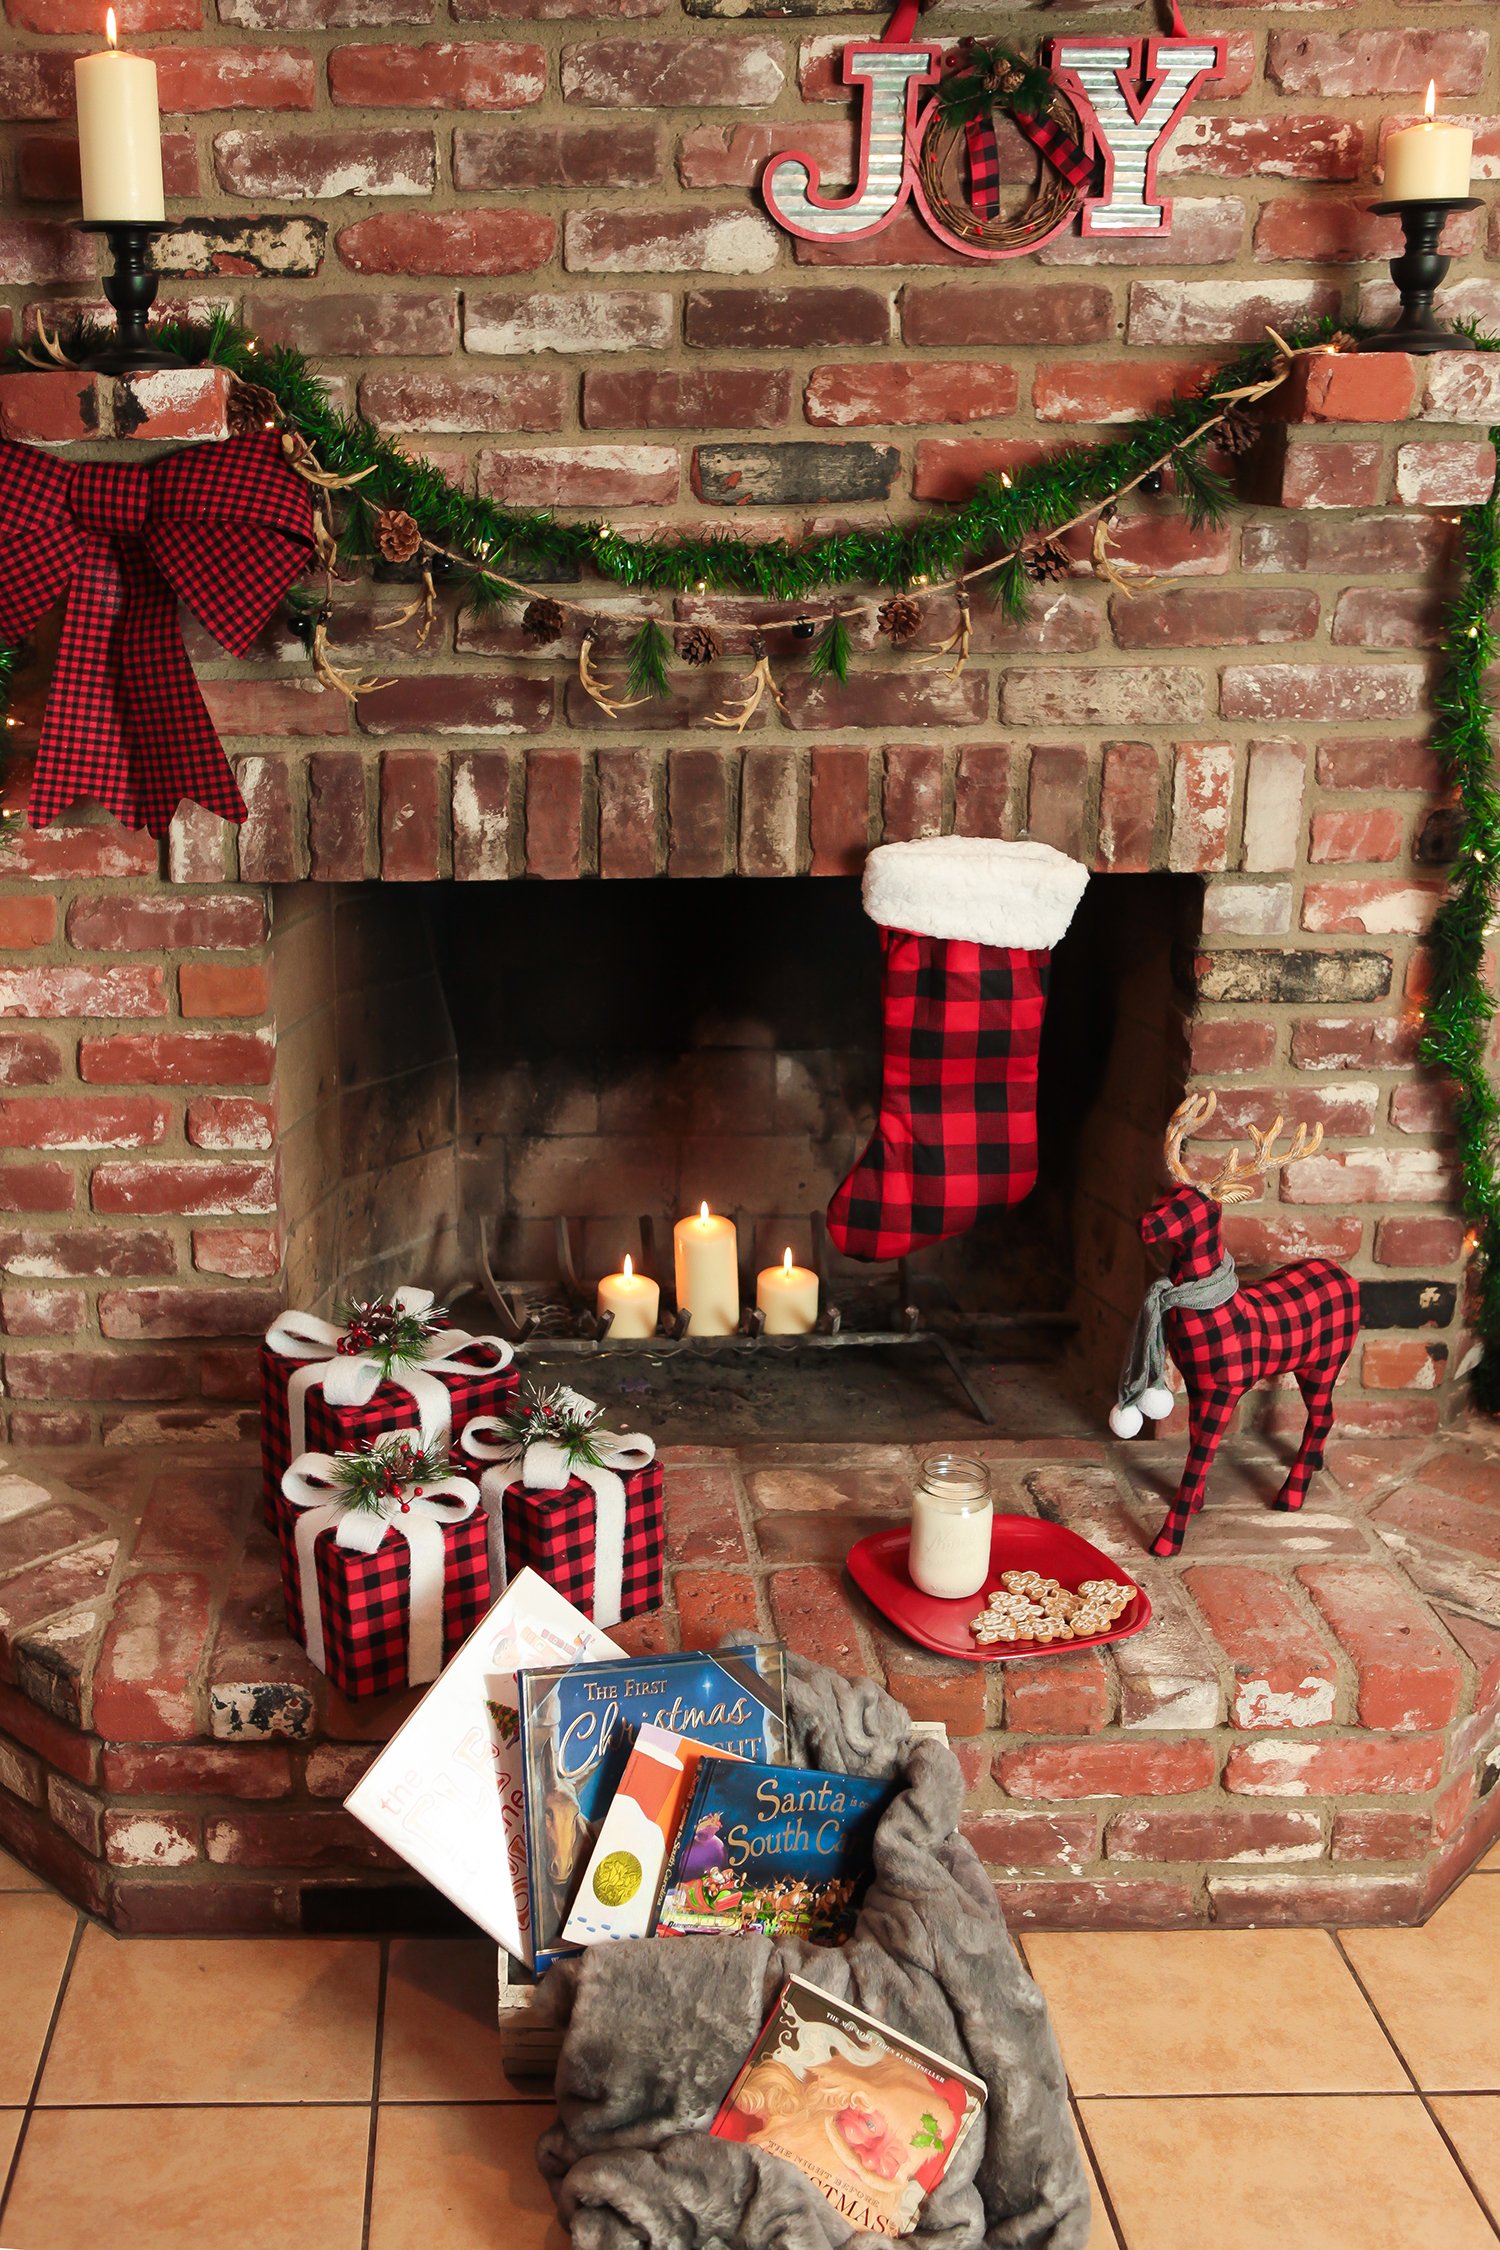 Staying home for the holidays?  This bright Christmas Fireplace is the perfect spot for reading Christmas stories and waiting for Santa.........